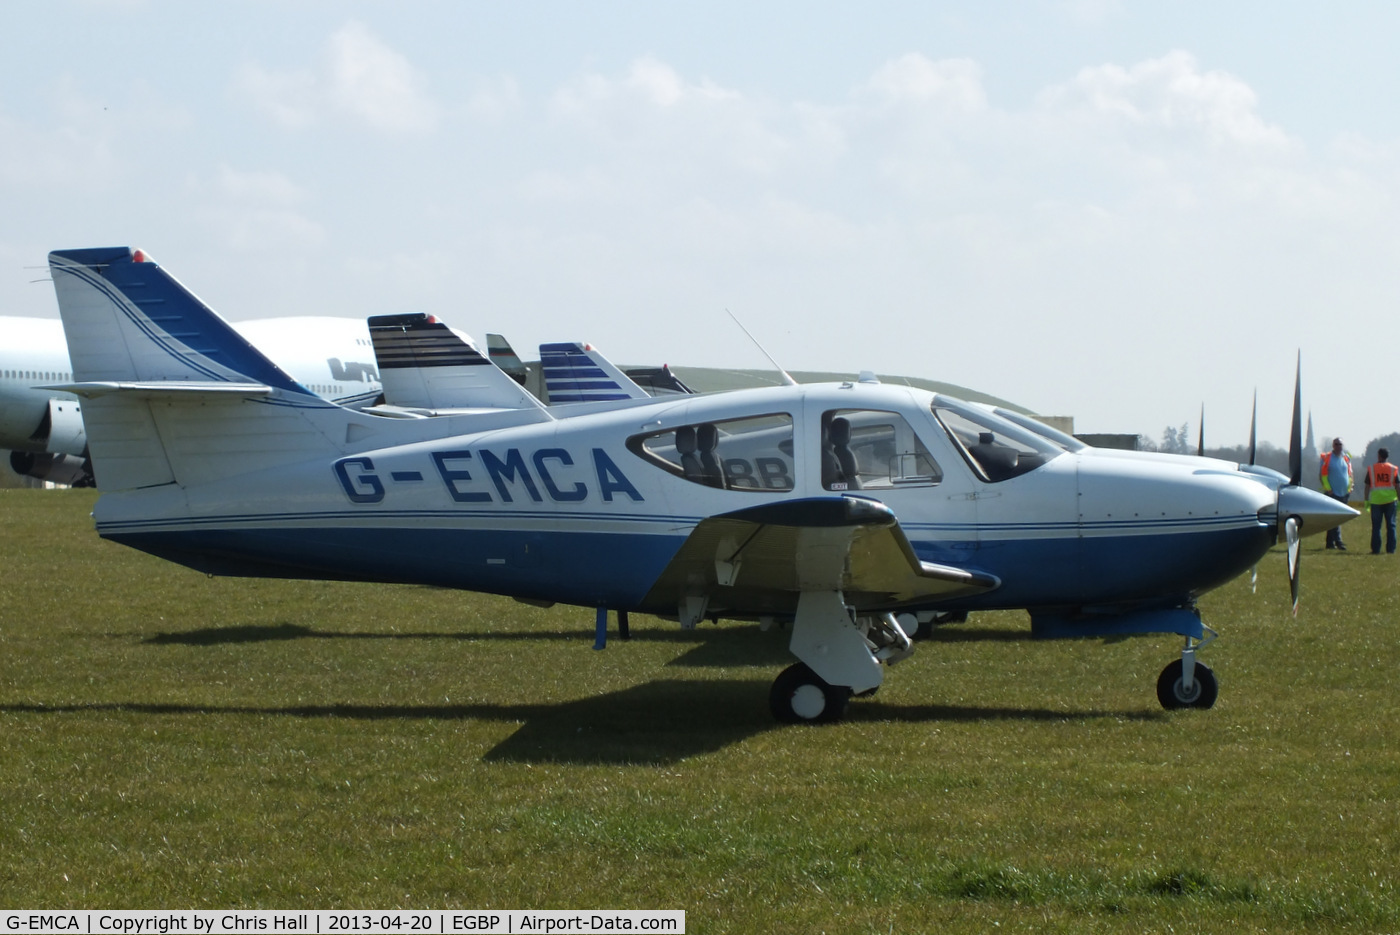 G-EMCA, 1999 Rockwell Commander 114B C/N 14661, visitor to the Rockwell Commander fly-in at Kemble